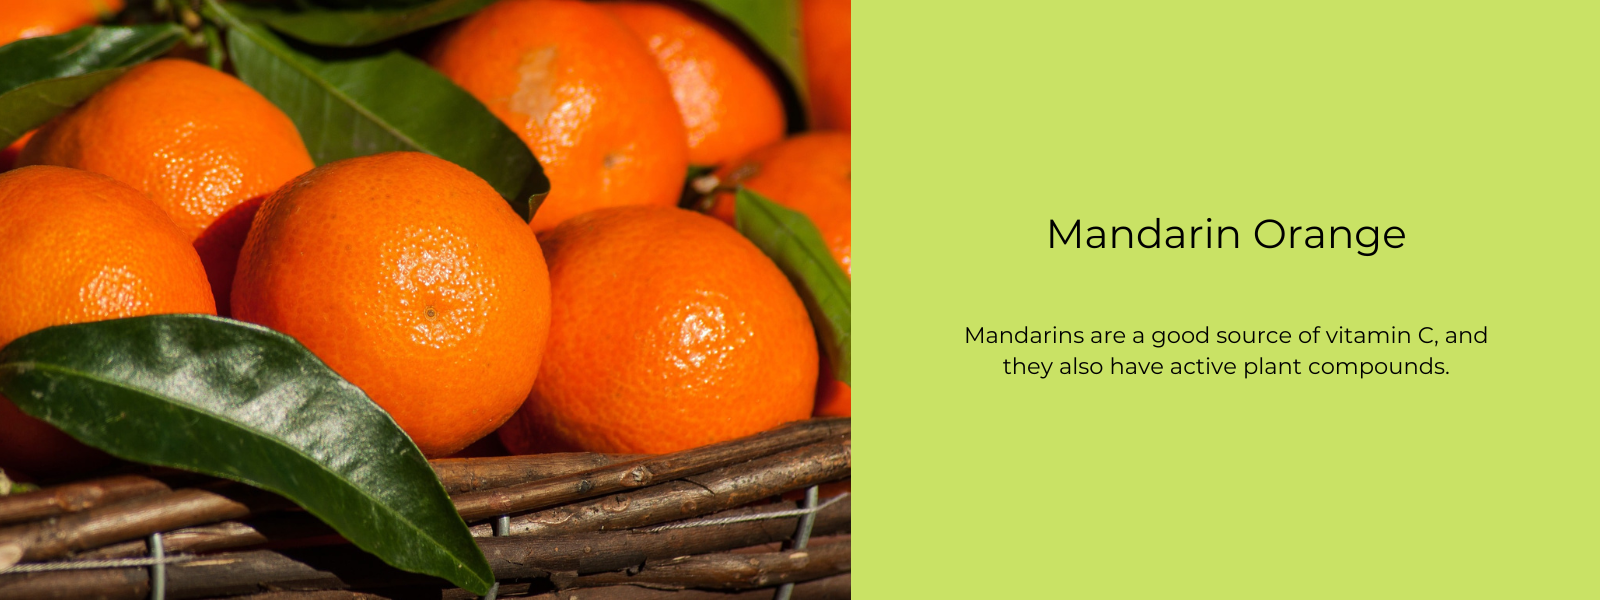 Mandarin Orange - Health Benefits, Uses and Important Facts